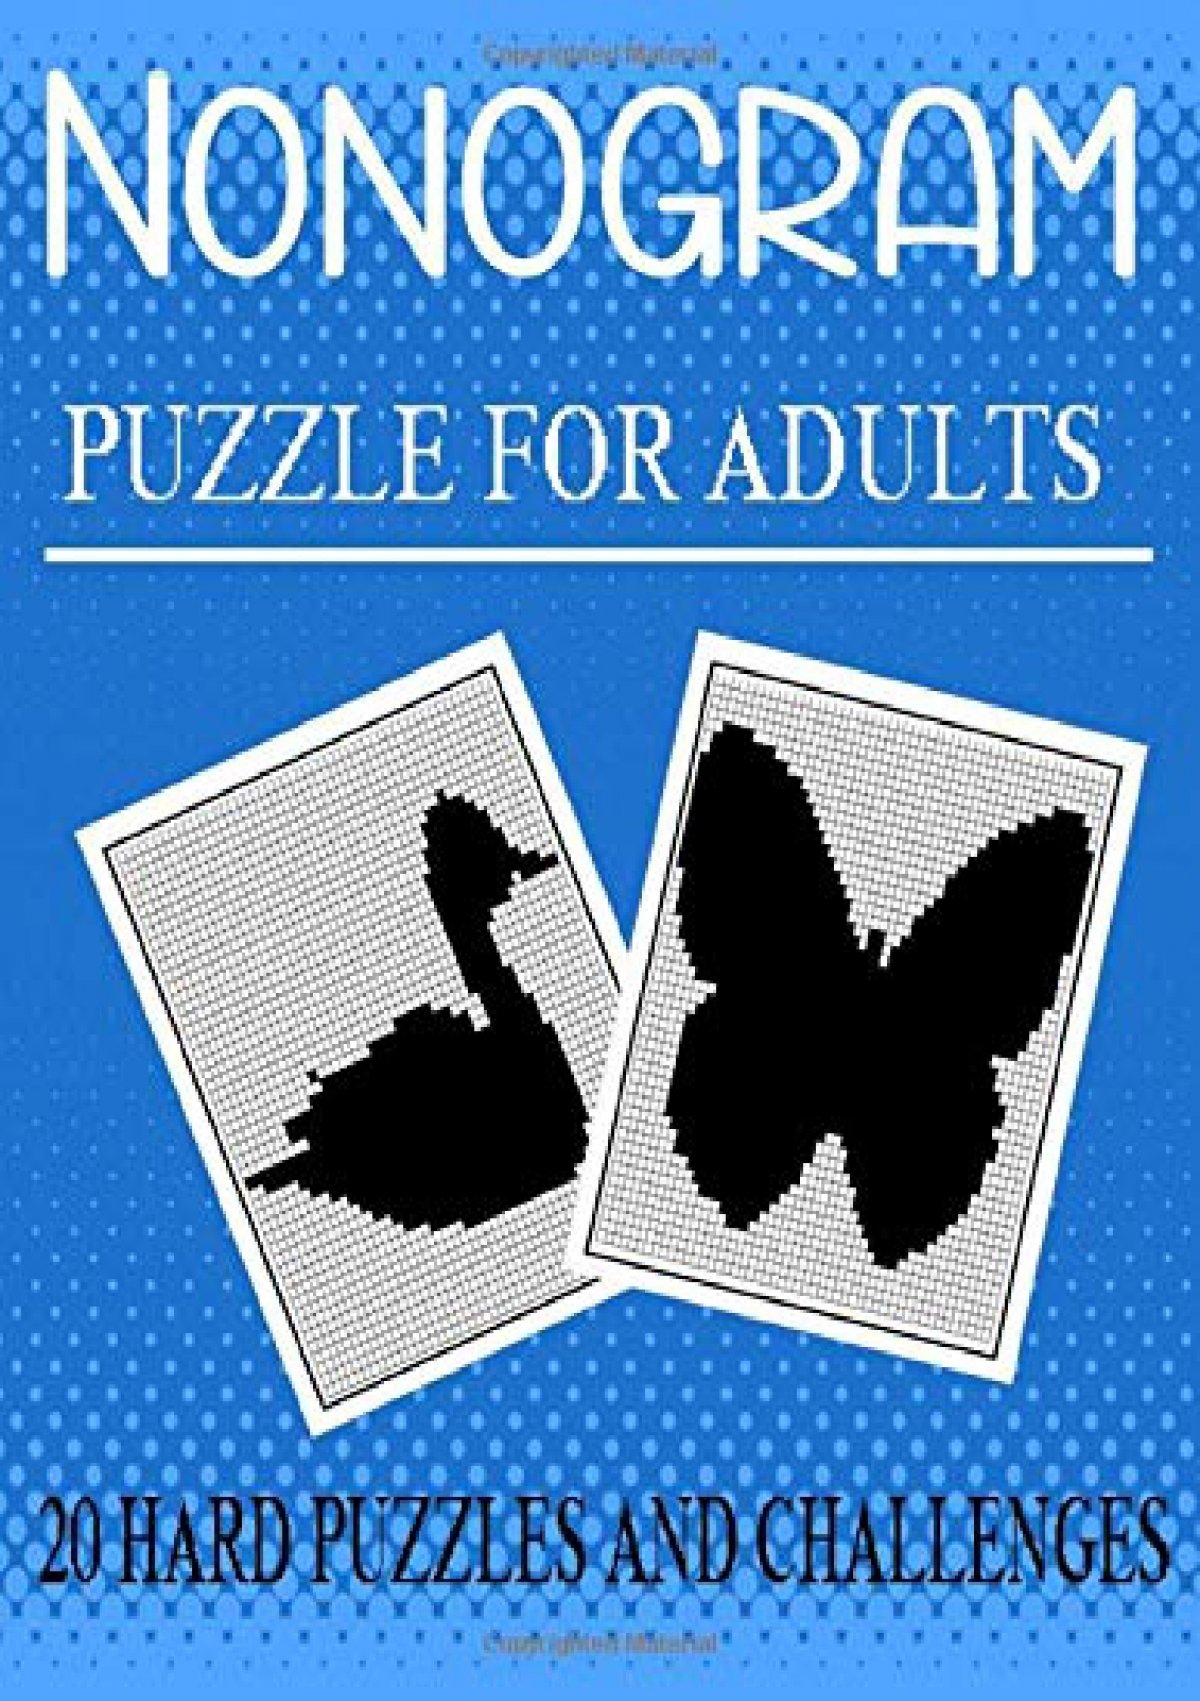 pdf-nonogram-puzzle-for-adults-picross-hanjie-griddlers-puzzle-book